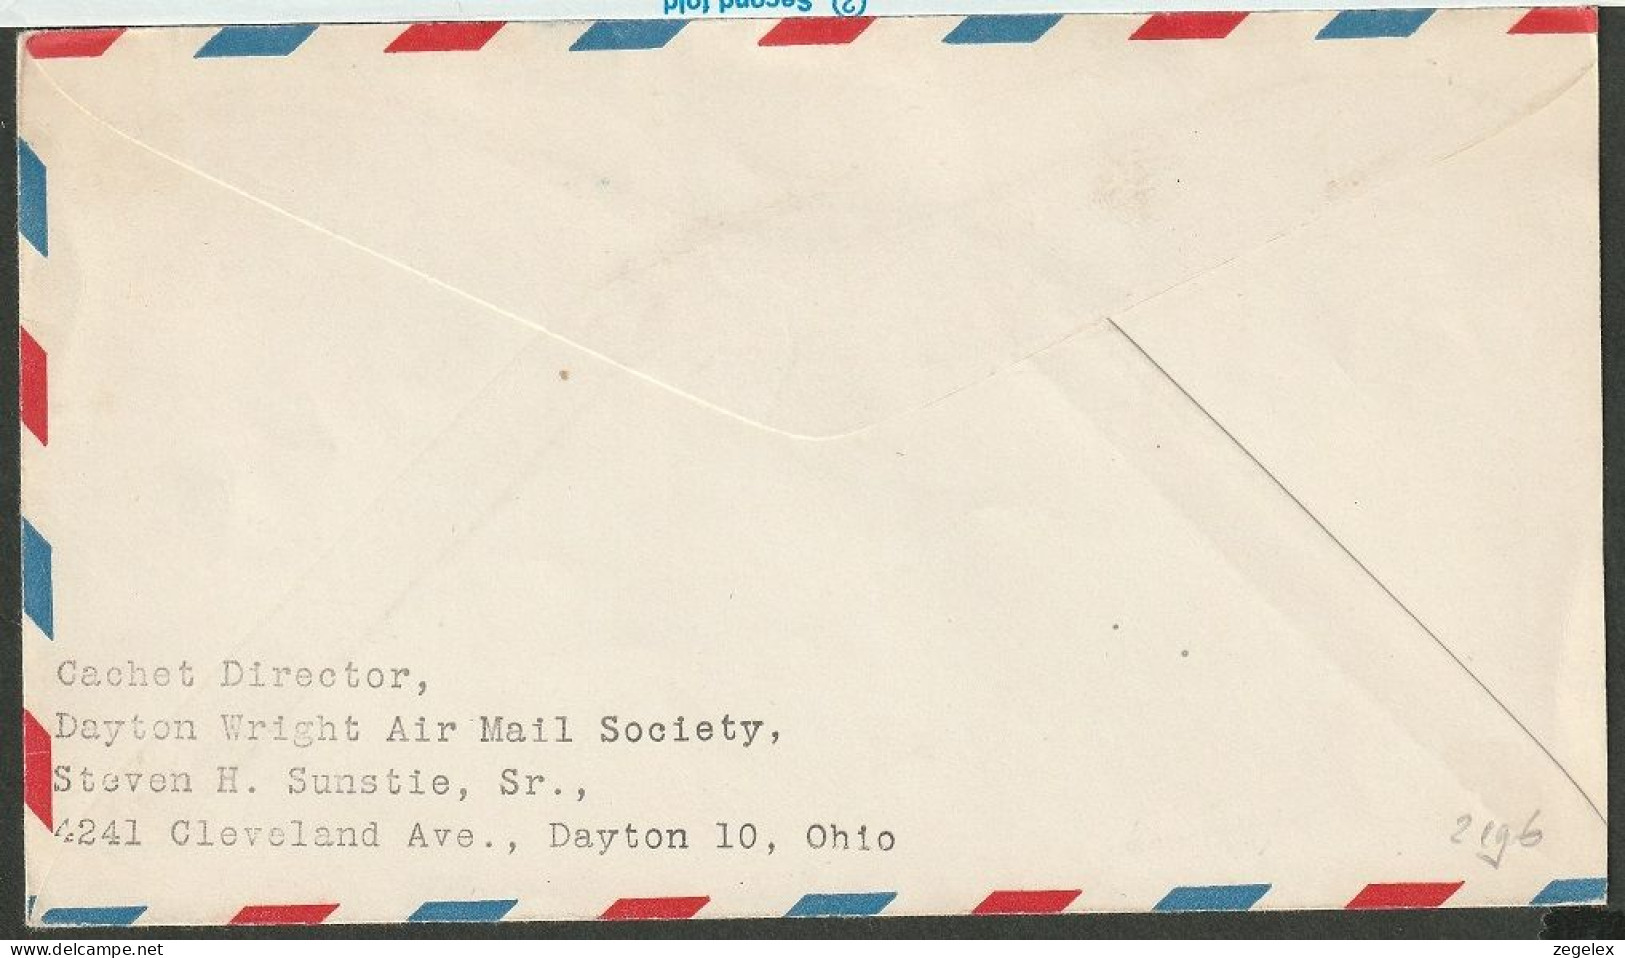 United States - Postal Stationary. 1943 Airmail 40th  Anniversary Of First Flight By Wright Brothers.  Scott UC3  - 1921-40